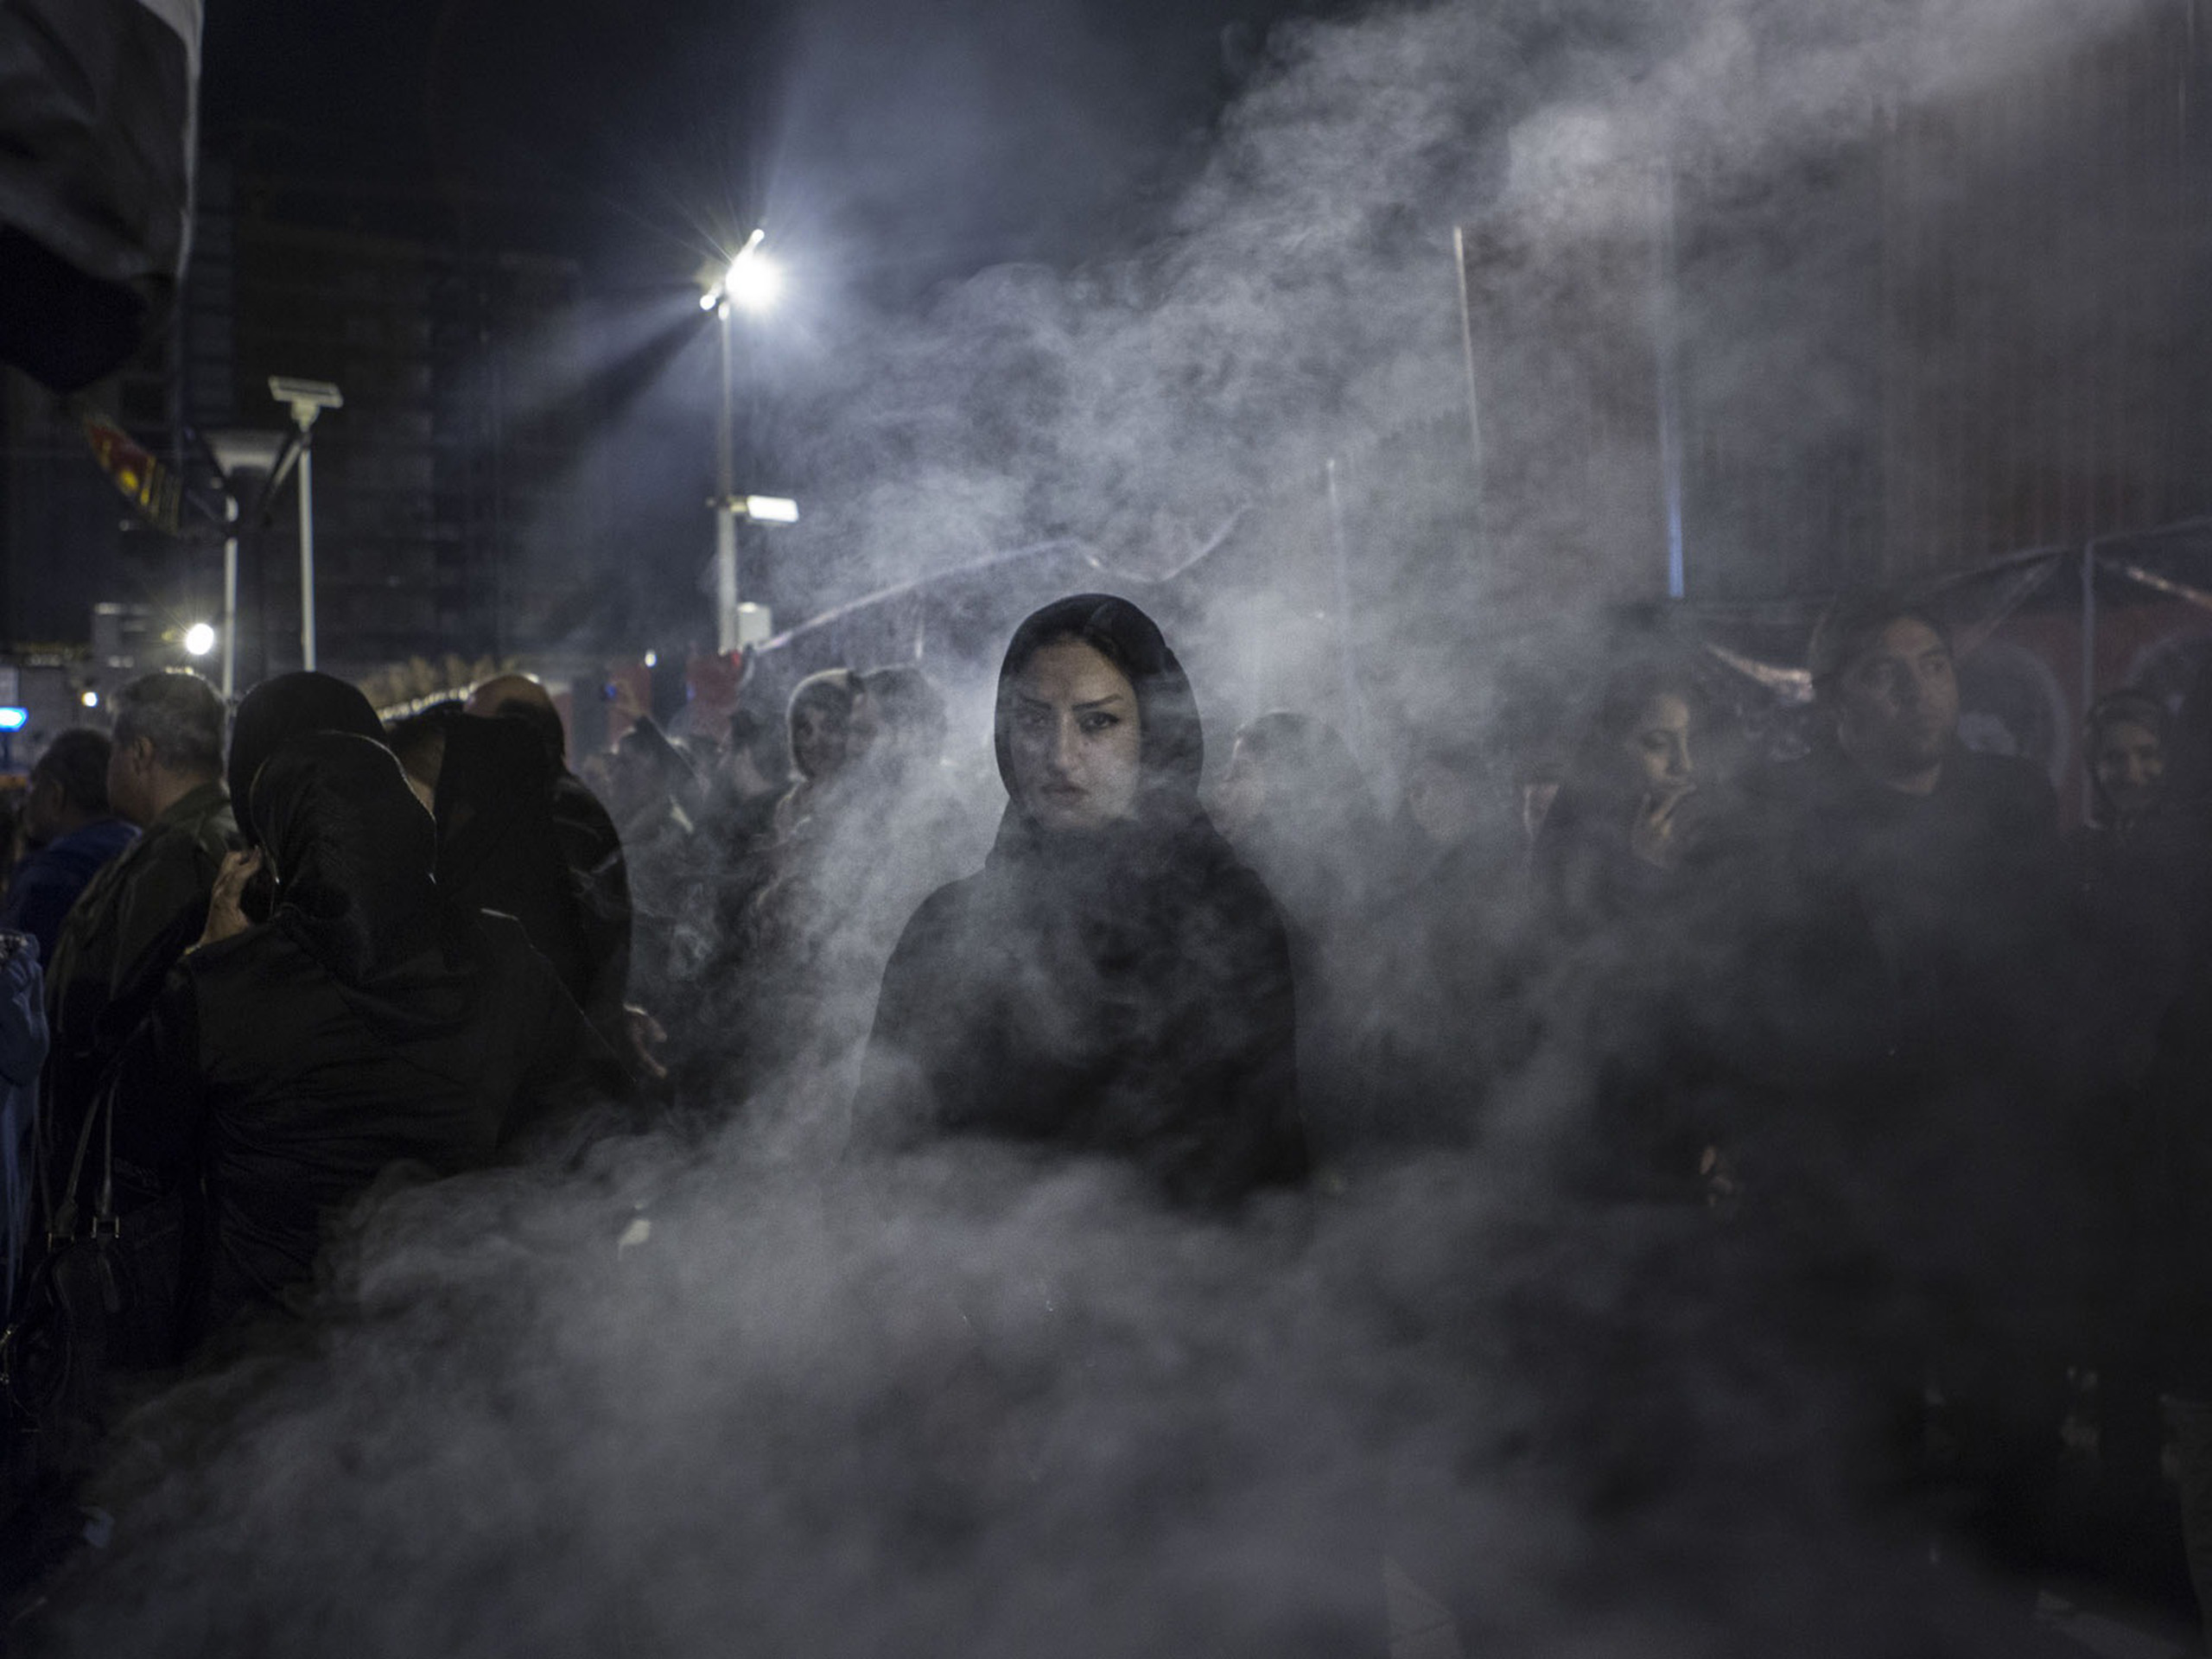 A woman in Tehran wreathed by the smoke of an herb burned during festivities marking the death of Hussein, the third Shi‘ite imam. (Newsha Tavakolian—Magnum for TIME)